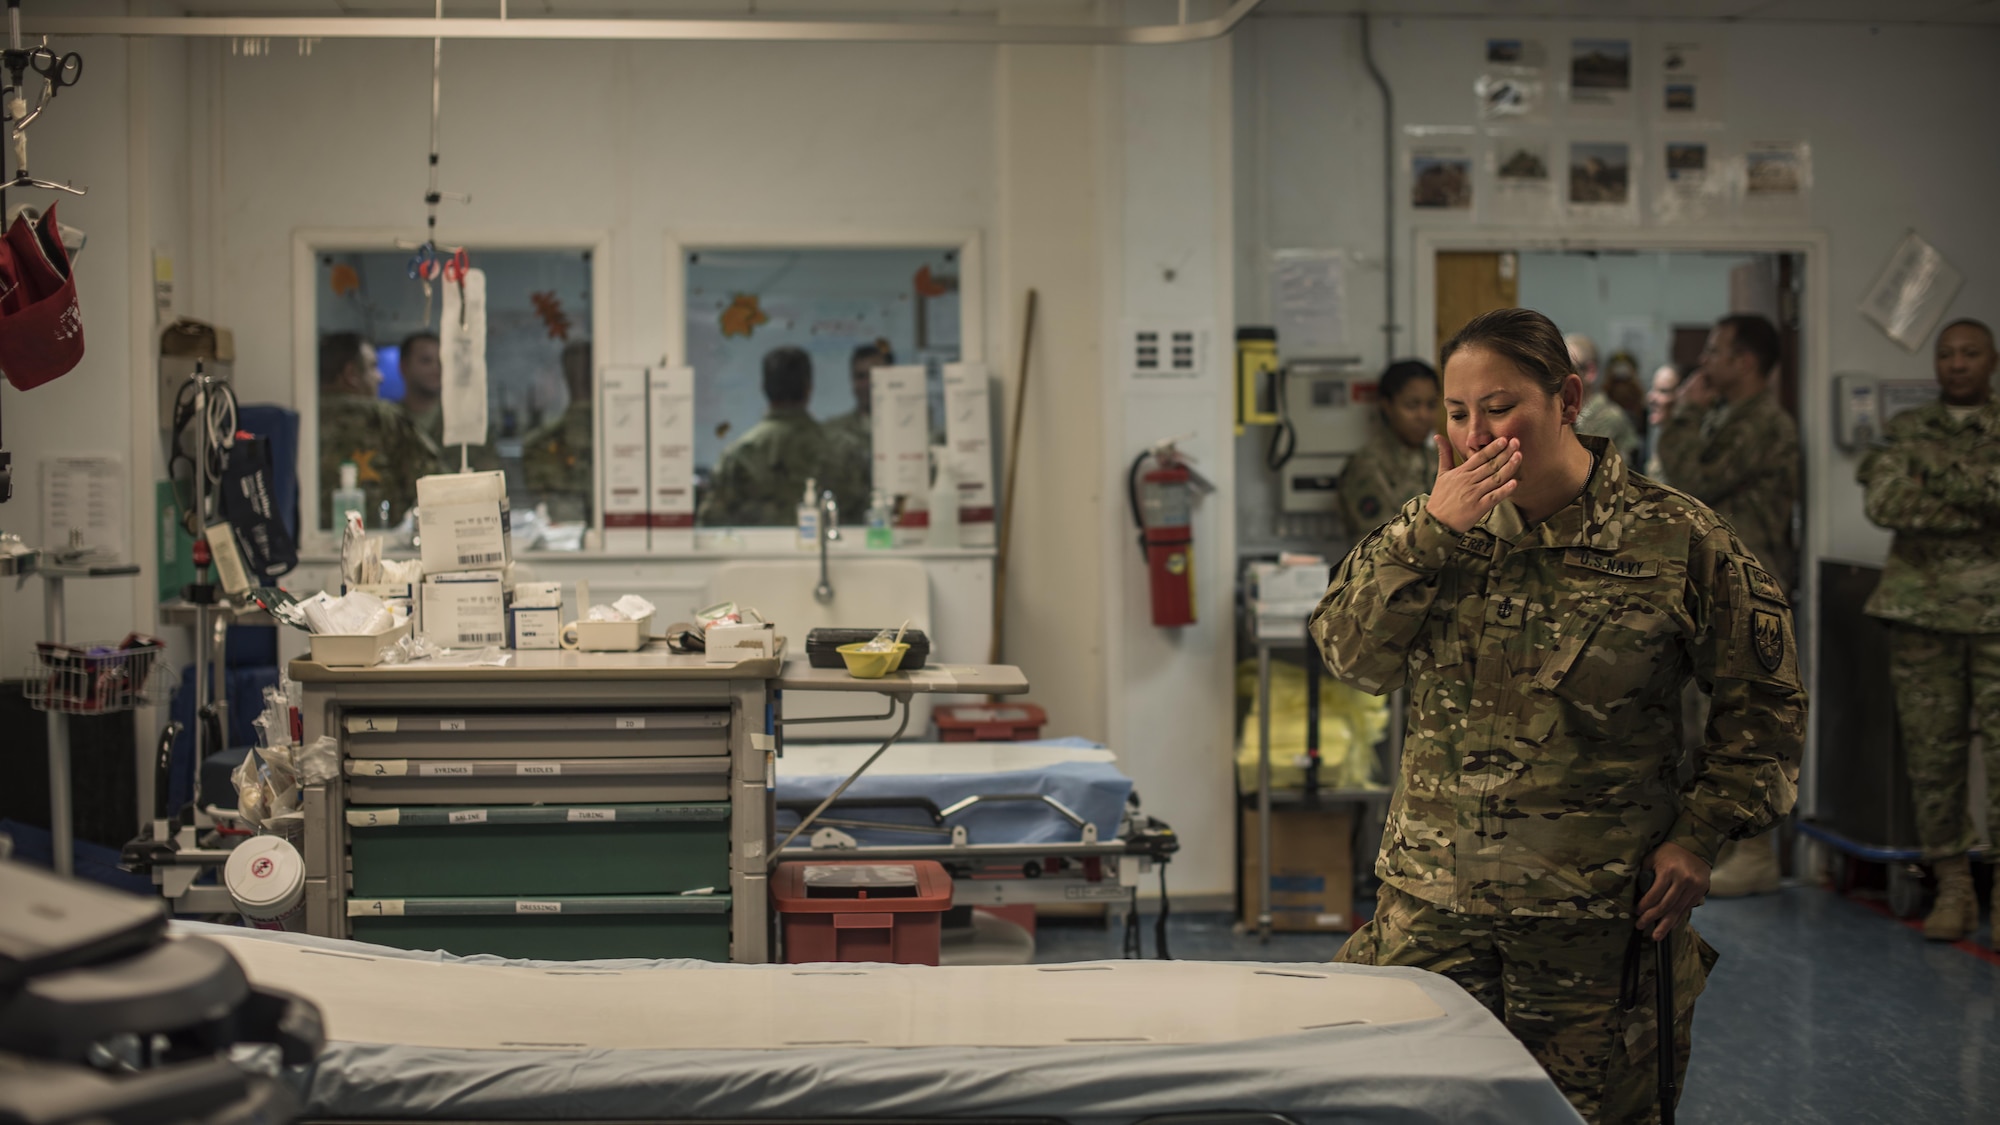 U.S. Navy Senior Chief Petty Officer Reina Hockenberry, Operation Proper Exit wounded warrior, returns to the bed she occupied while a patient at the Craig Joint Theater Hospital during a return visit to Bagram Airfield, Afghanistan Nov. 16, 2016. Hockenberry was wounded in August 2014 during an attack in Kabul and went through the CJTH before being medically evacuated. (U.S. Air Force photo by Staff Sgt. Katherine Spessa)